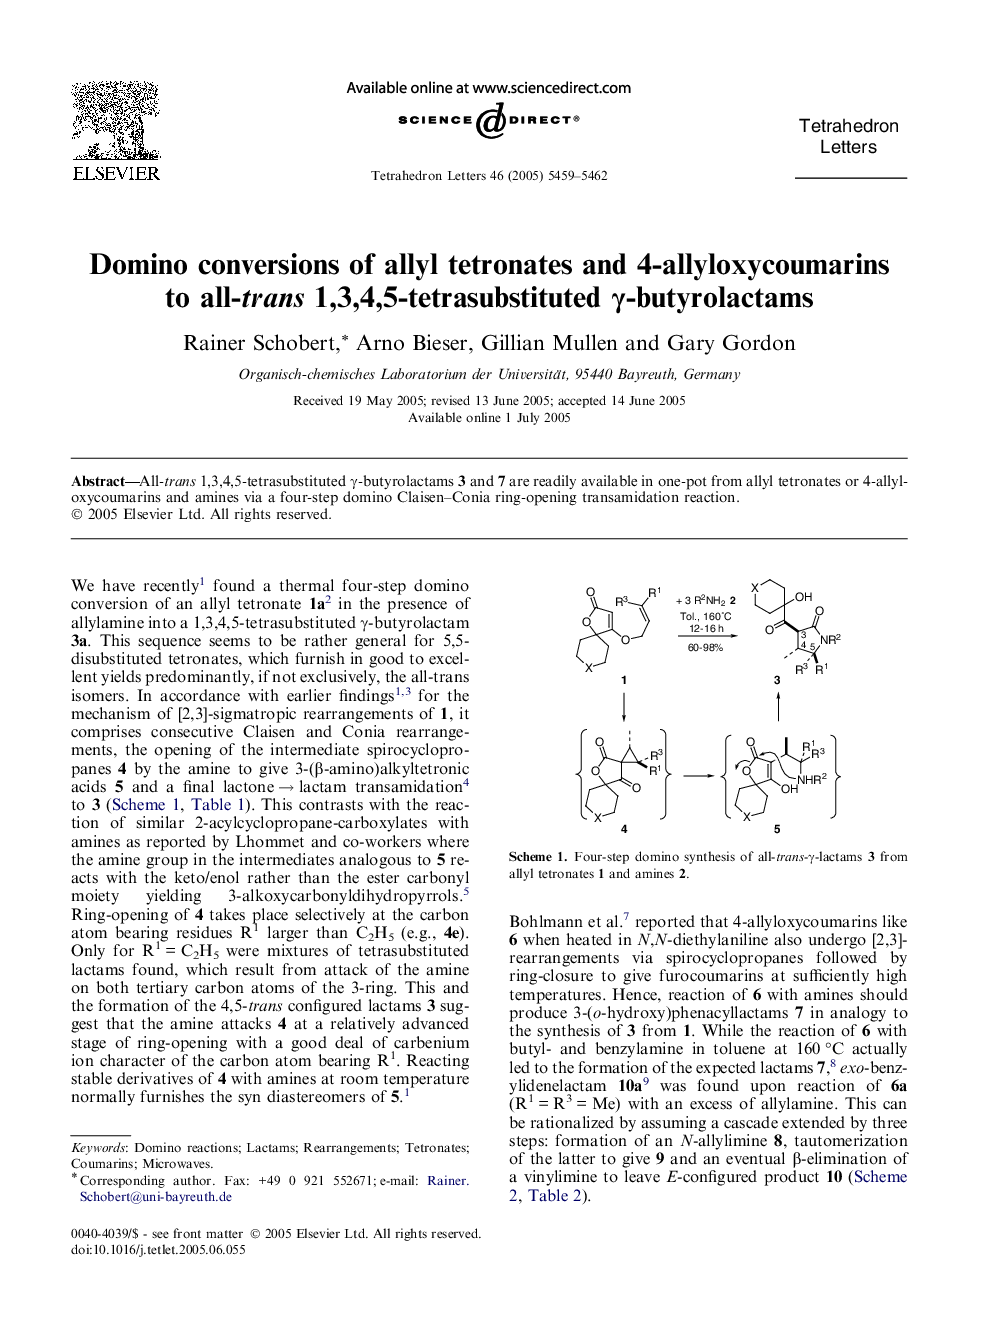 Domino conversions of allyl tetronates and 4-allyloxycoumarins to all-trans 1,3,4,5-tetrasubstituted Î³-butyrolactams